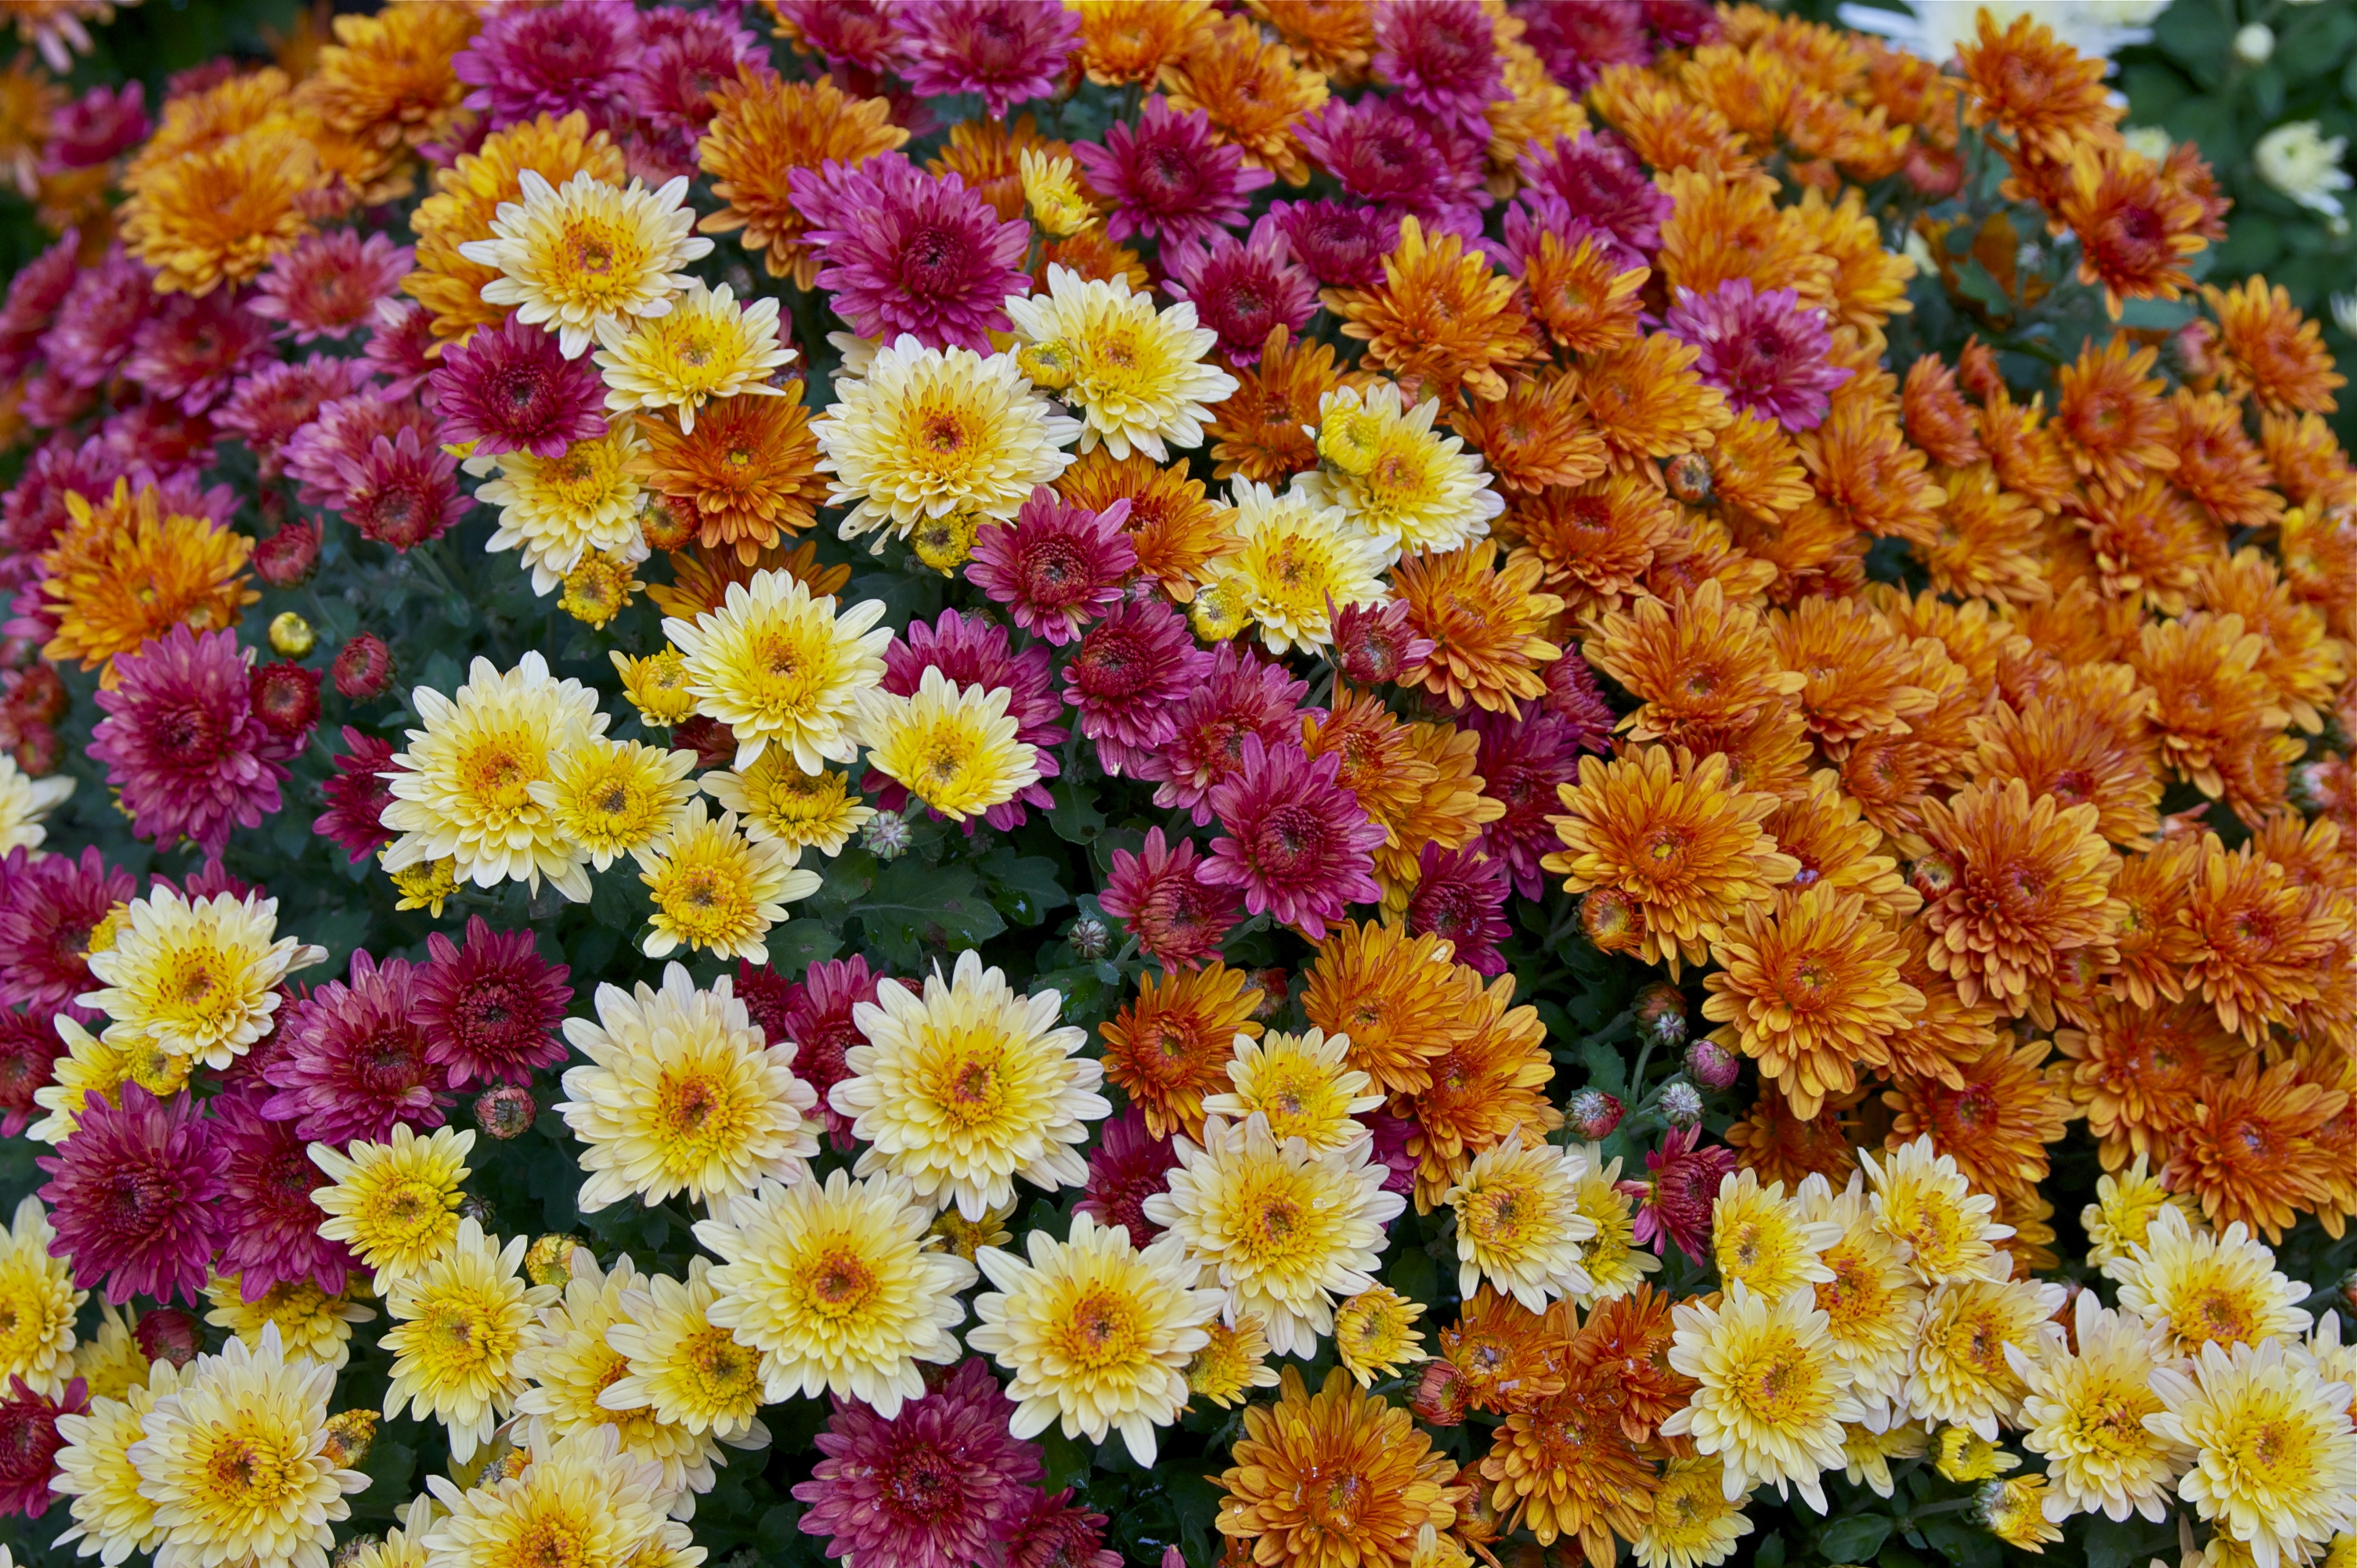 Well-pinched chrysanthemum